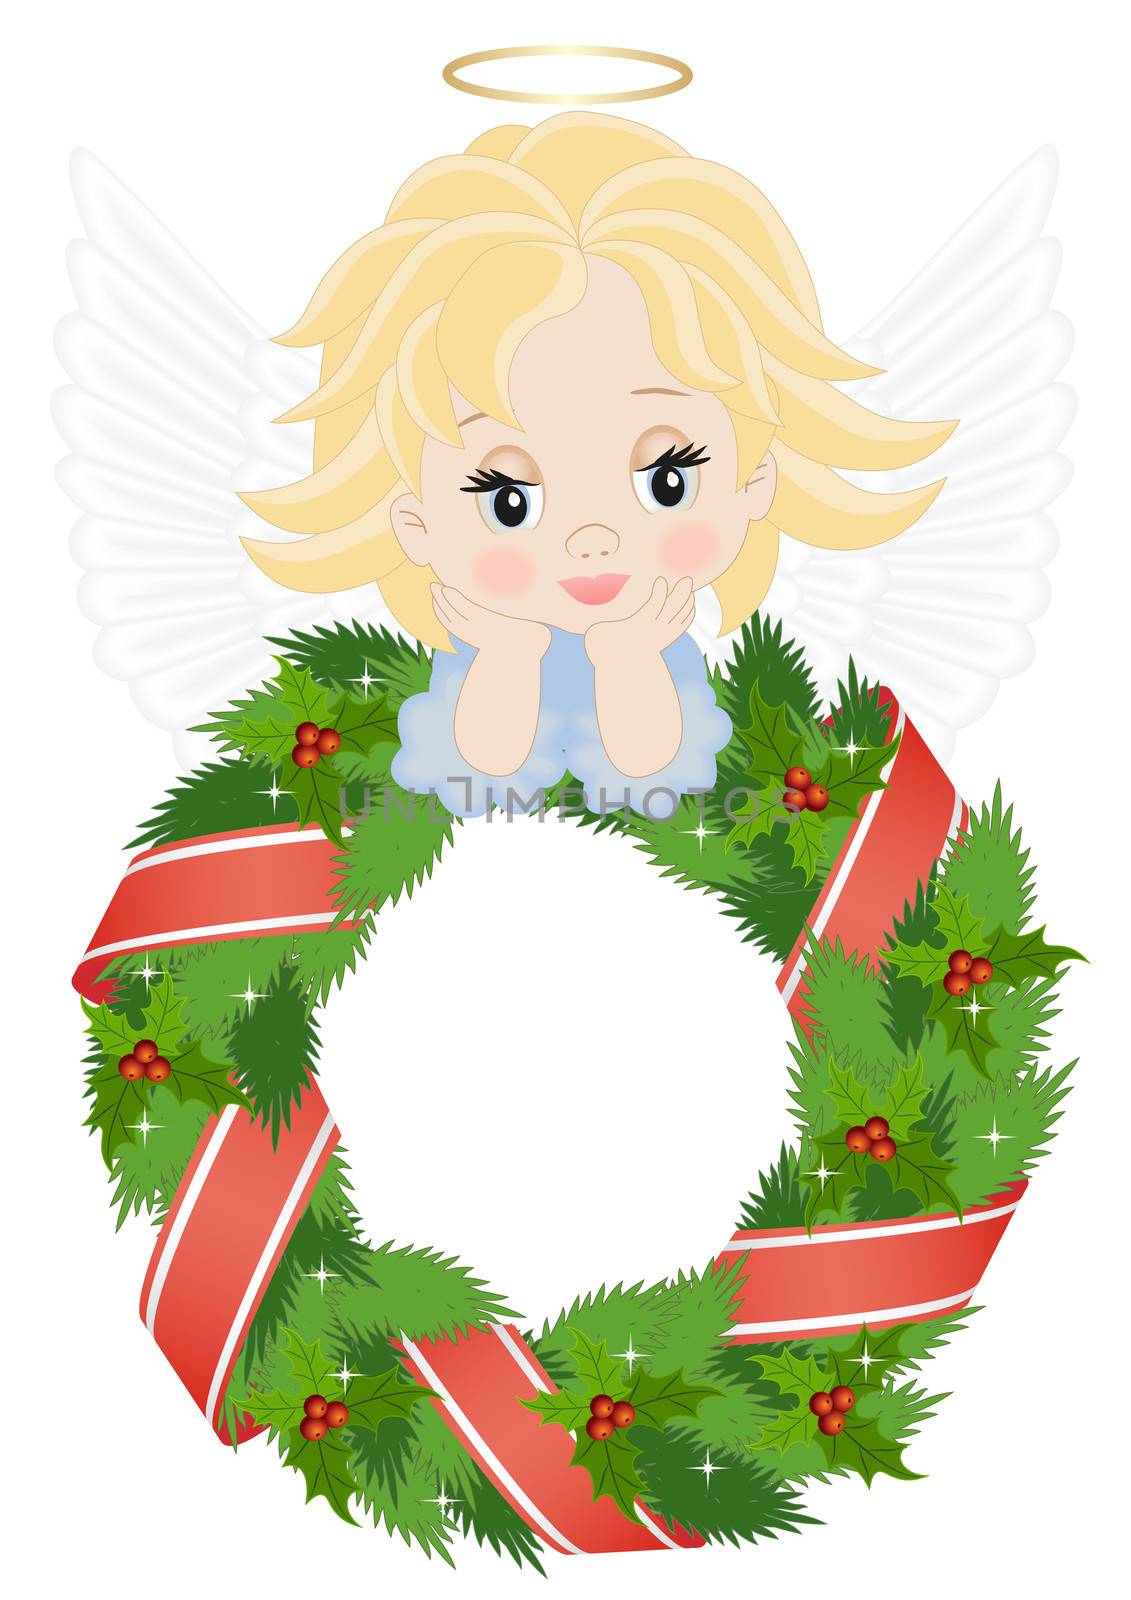 angel on the Christmas wreath isolated on a white background